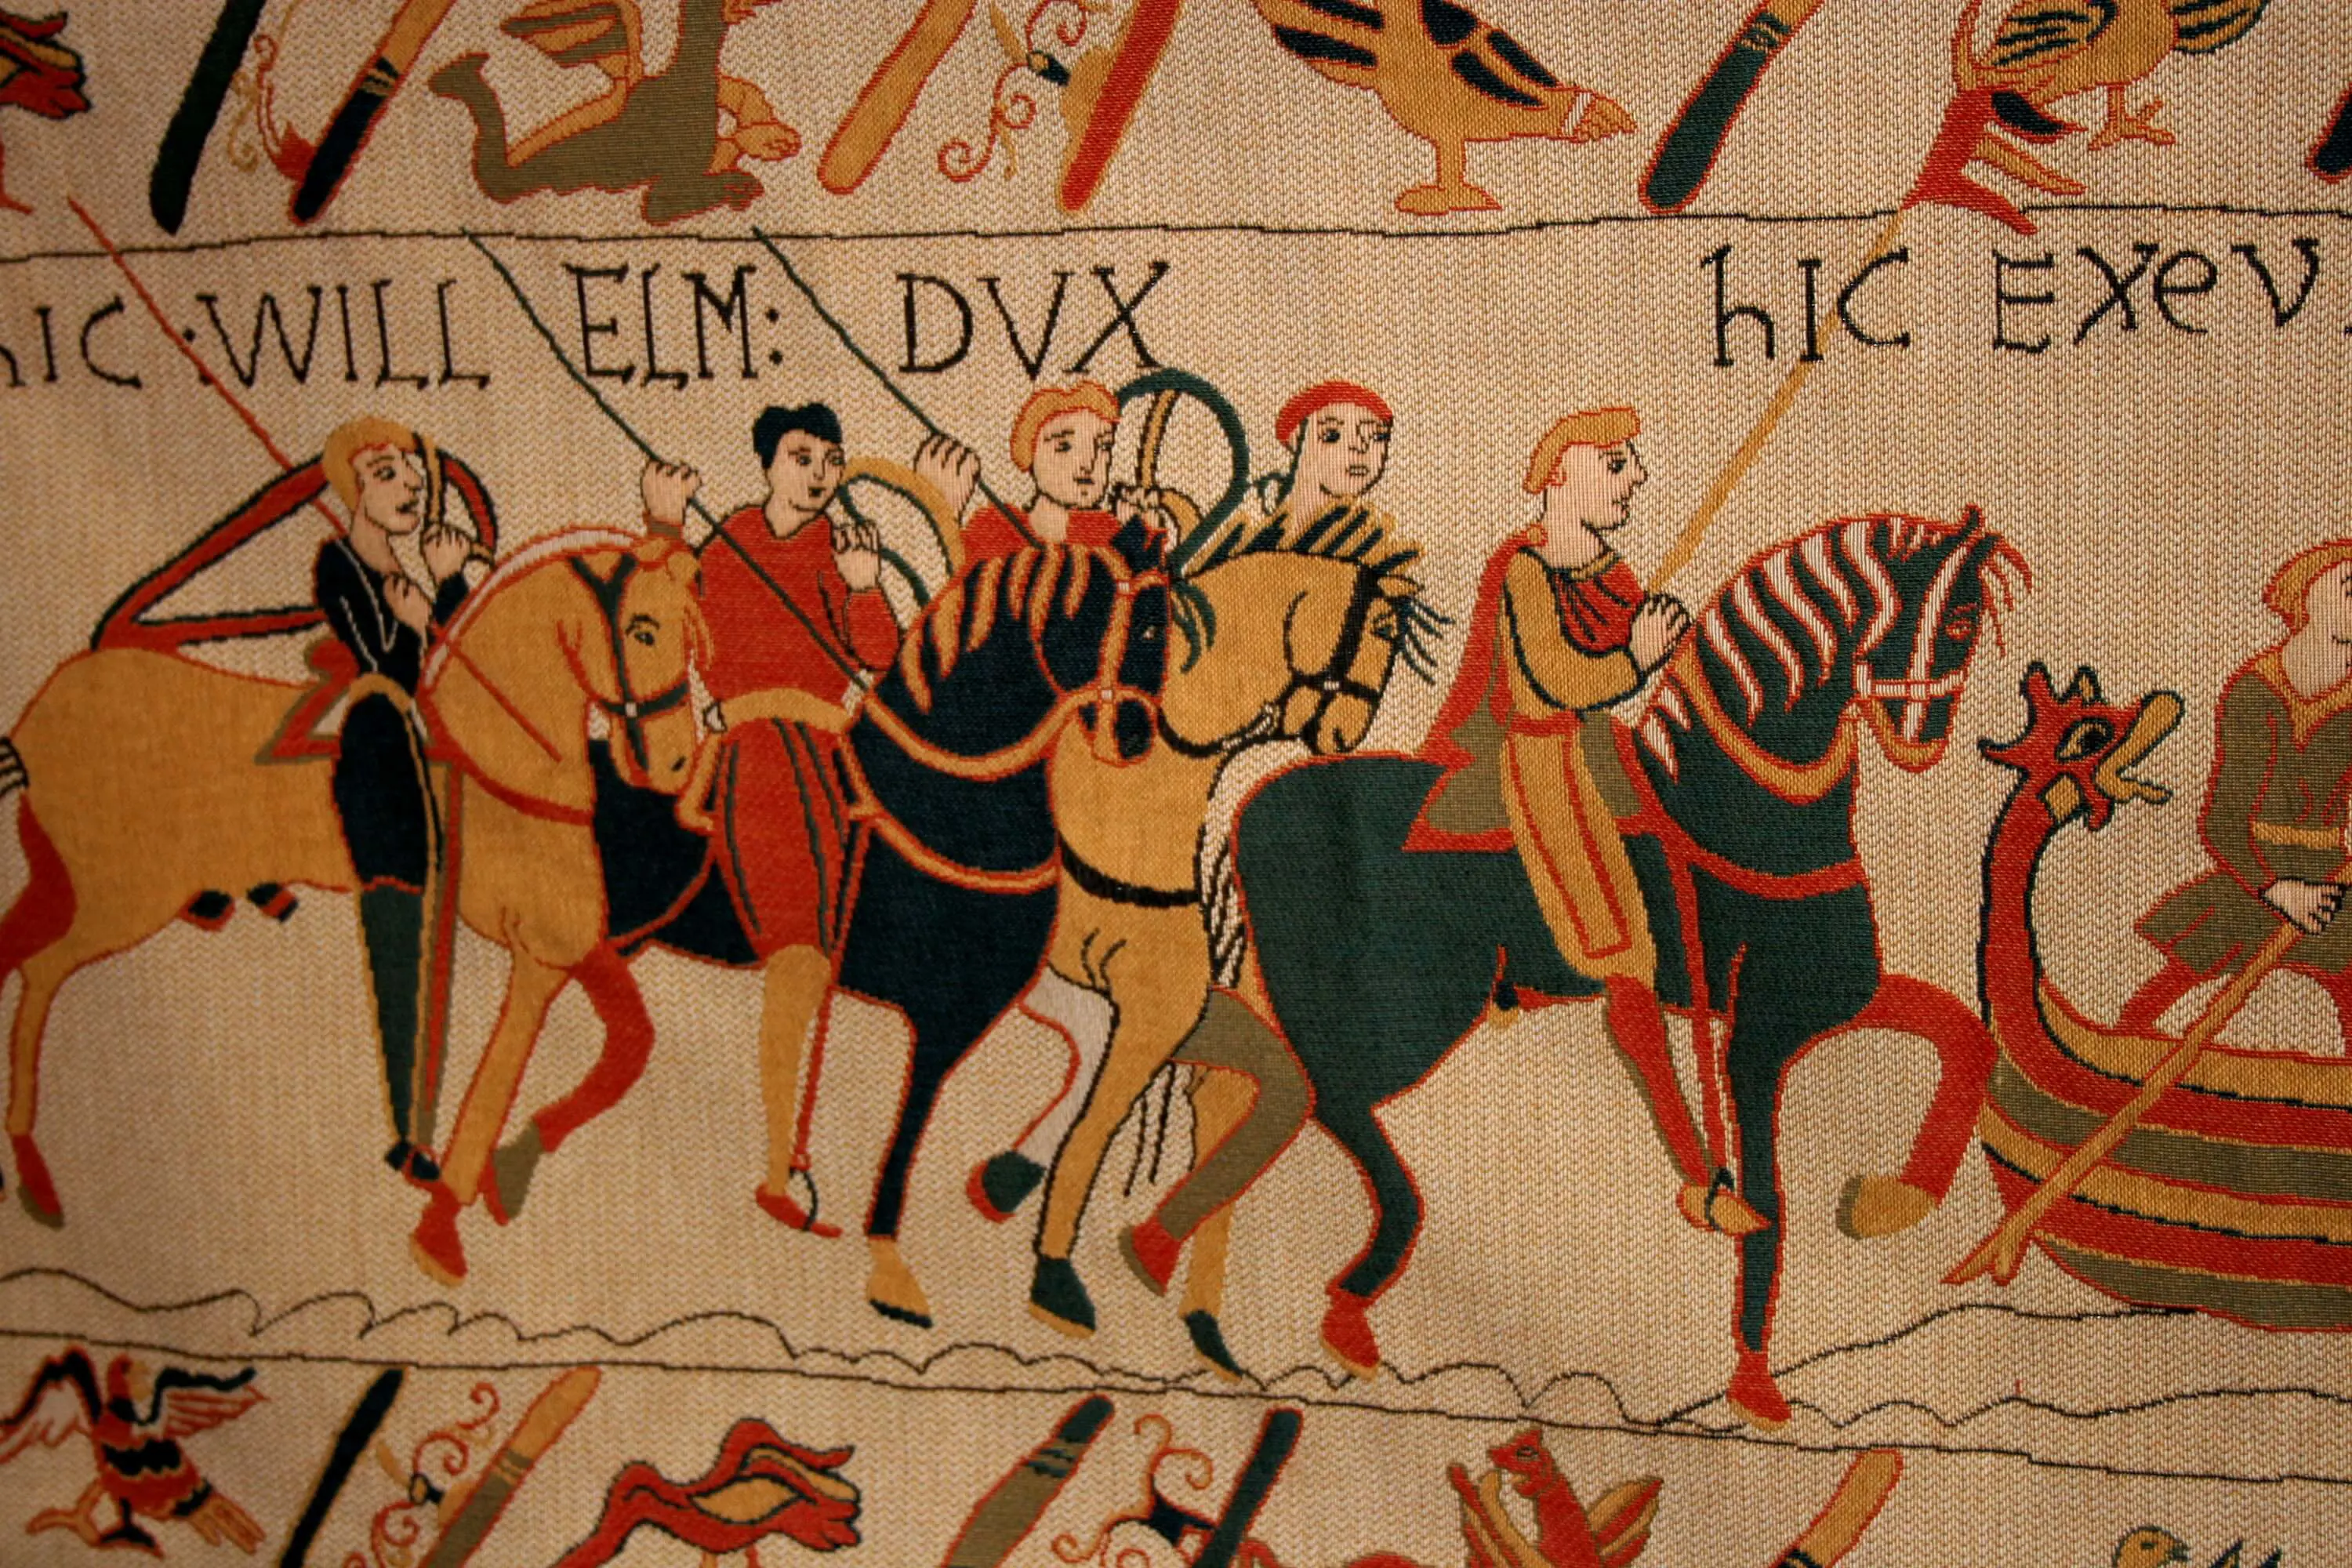 Normandy - Bayeux Tapestry